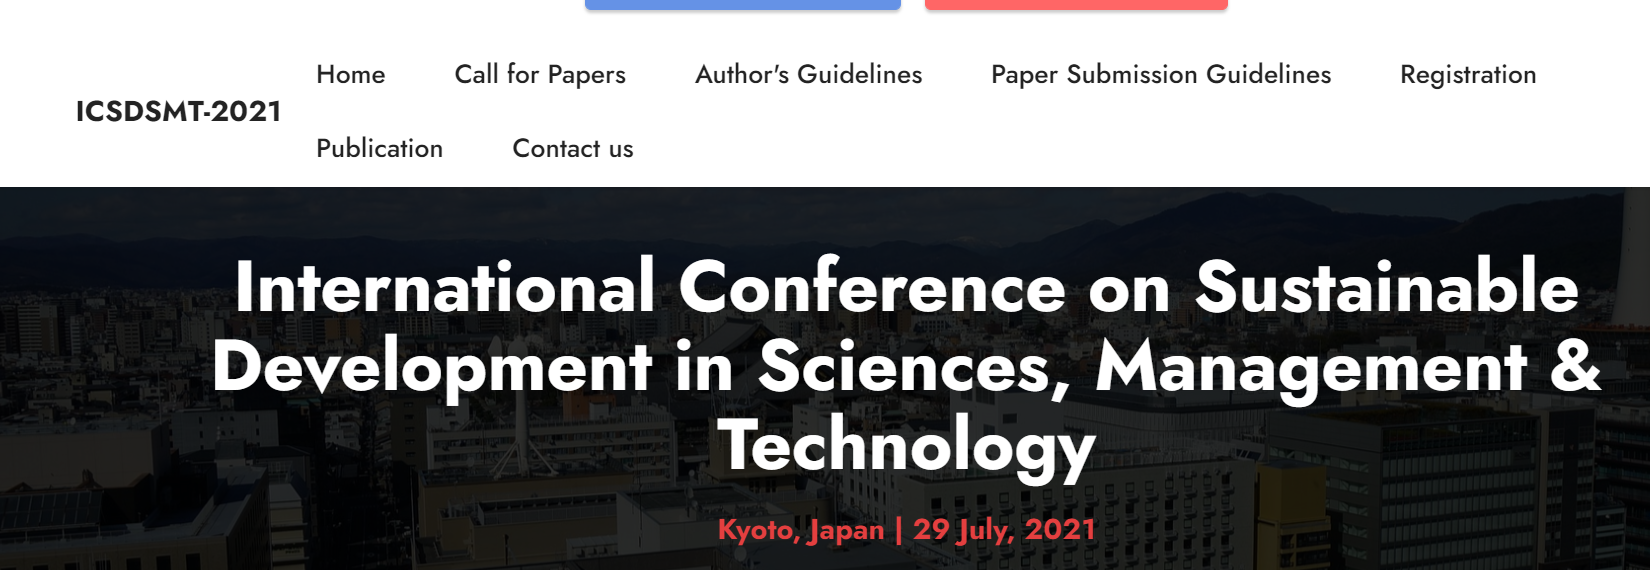 International Conference on Sustainable Development in Sciences, Management & Technology, Kyoto, Japan, Japan